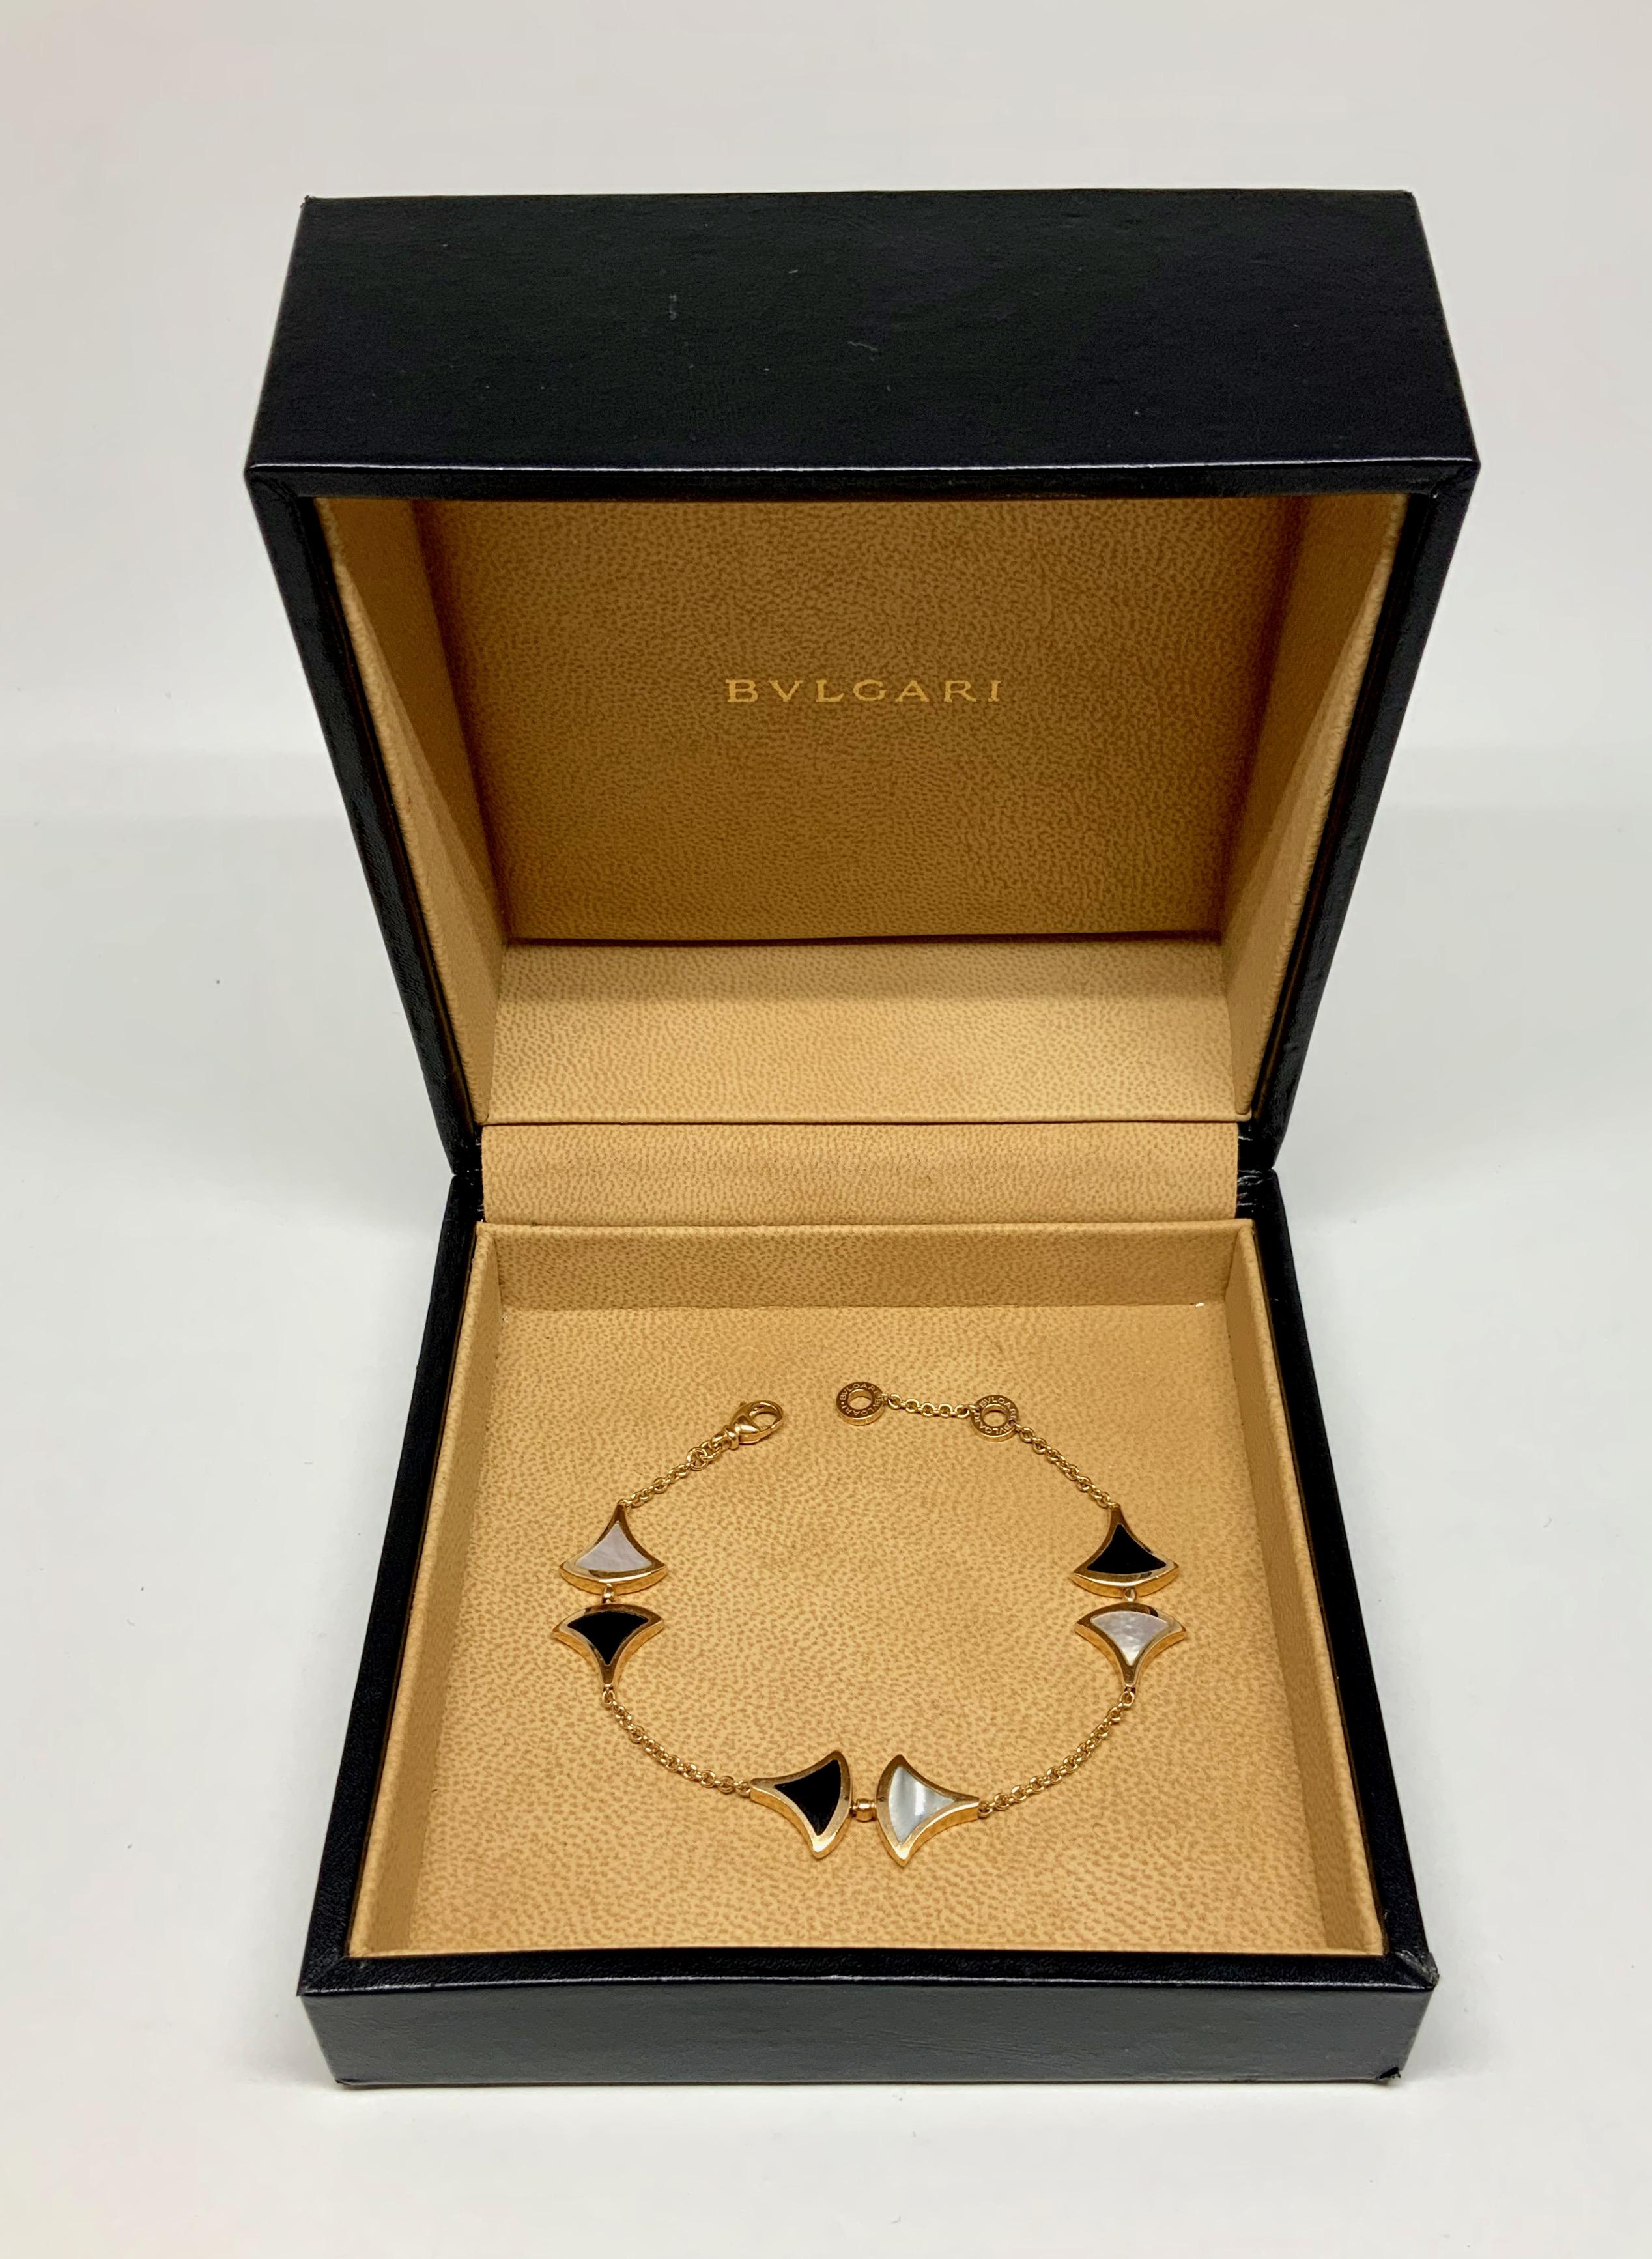 This pre-owned bracelet is part of the Divas' Dream Bulgari collection.
The motif is inspired by the 